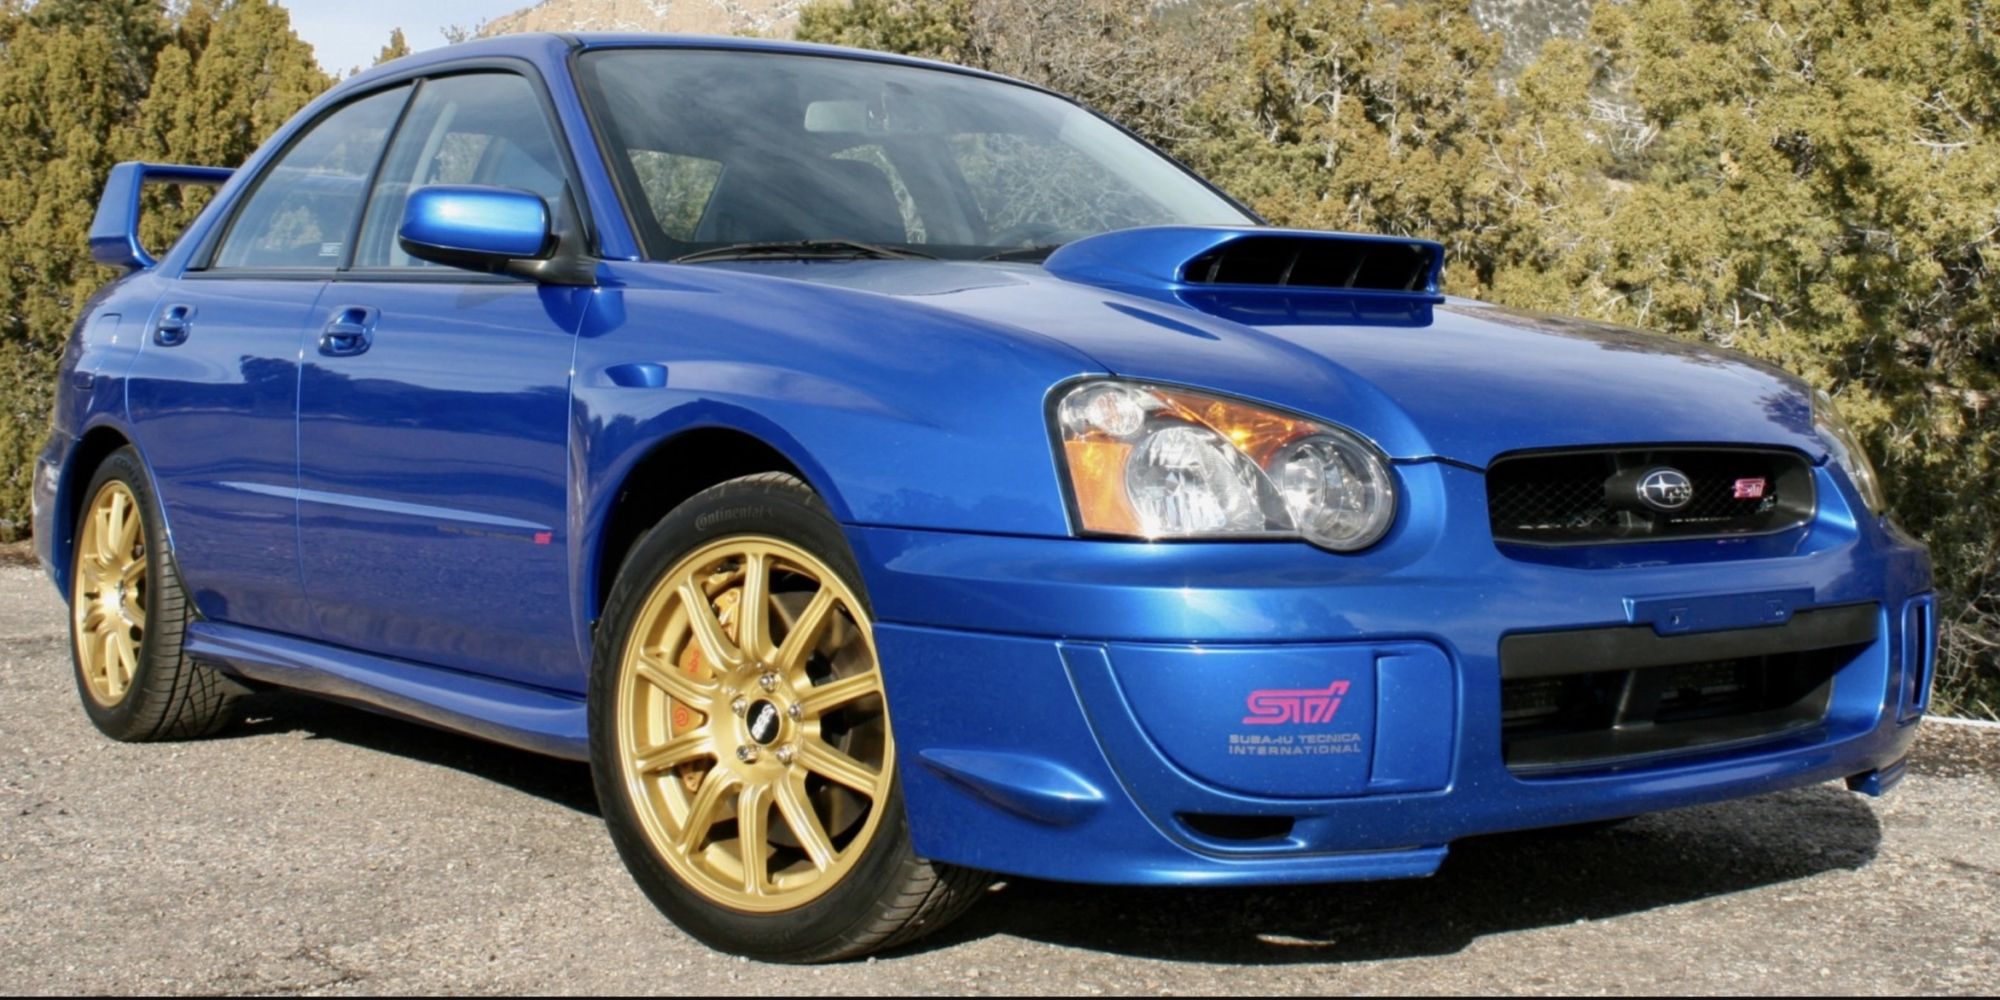 The front of the WRX STI